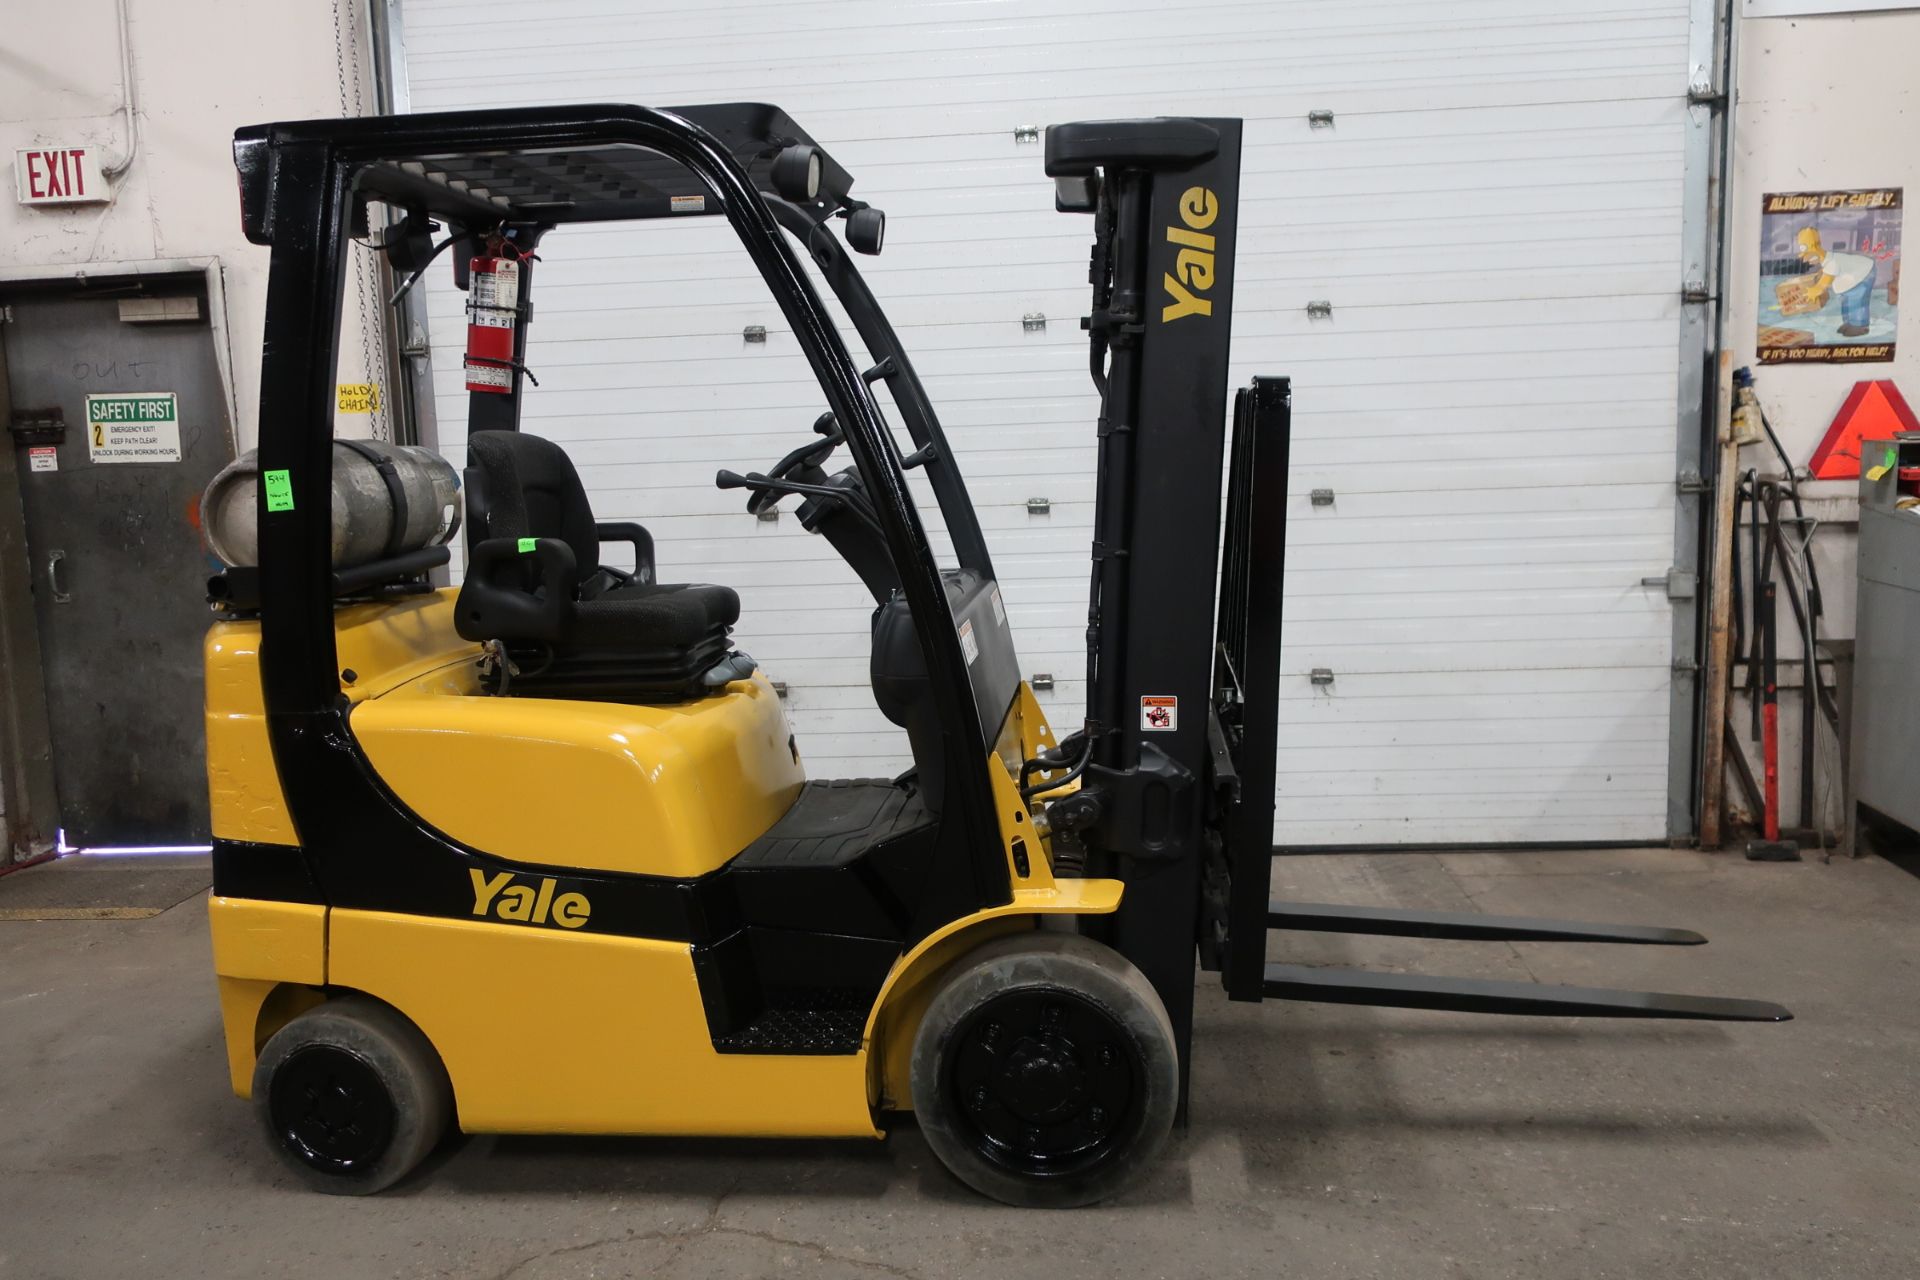 FREE CUSTOMS - 2011 Yale 5000lbs Capacity Forklift with 3-stage mast - LPG (propane) with